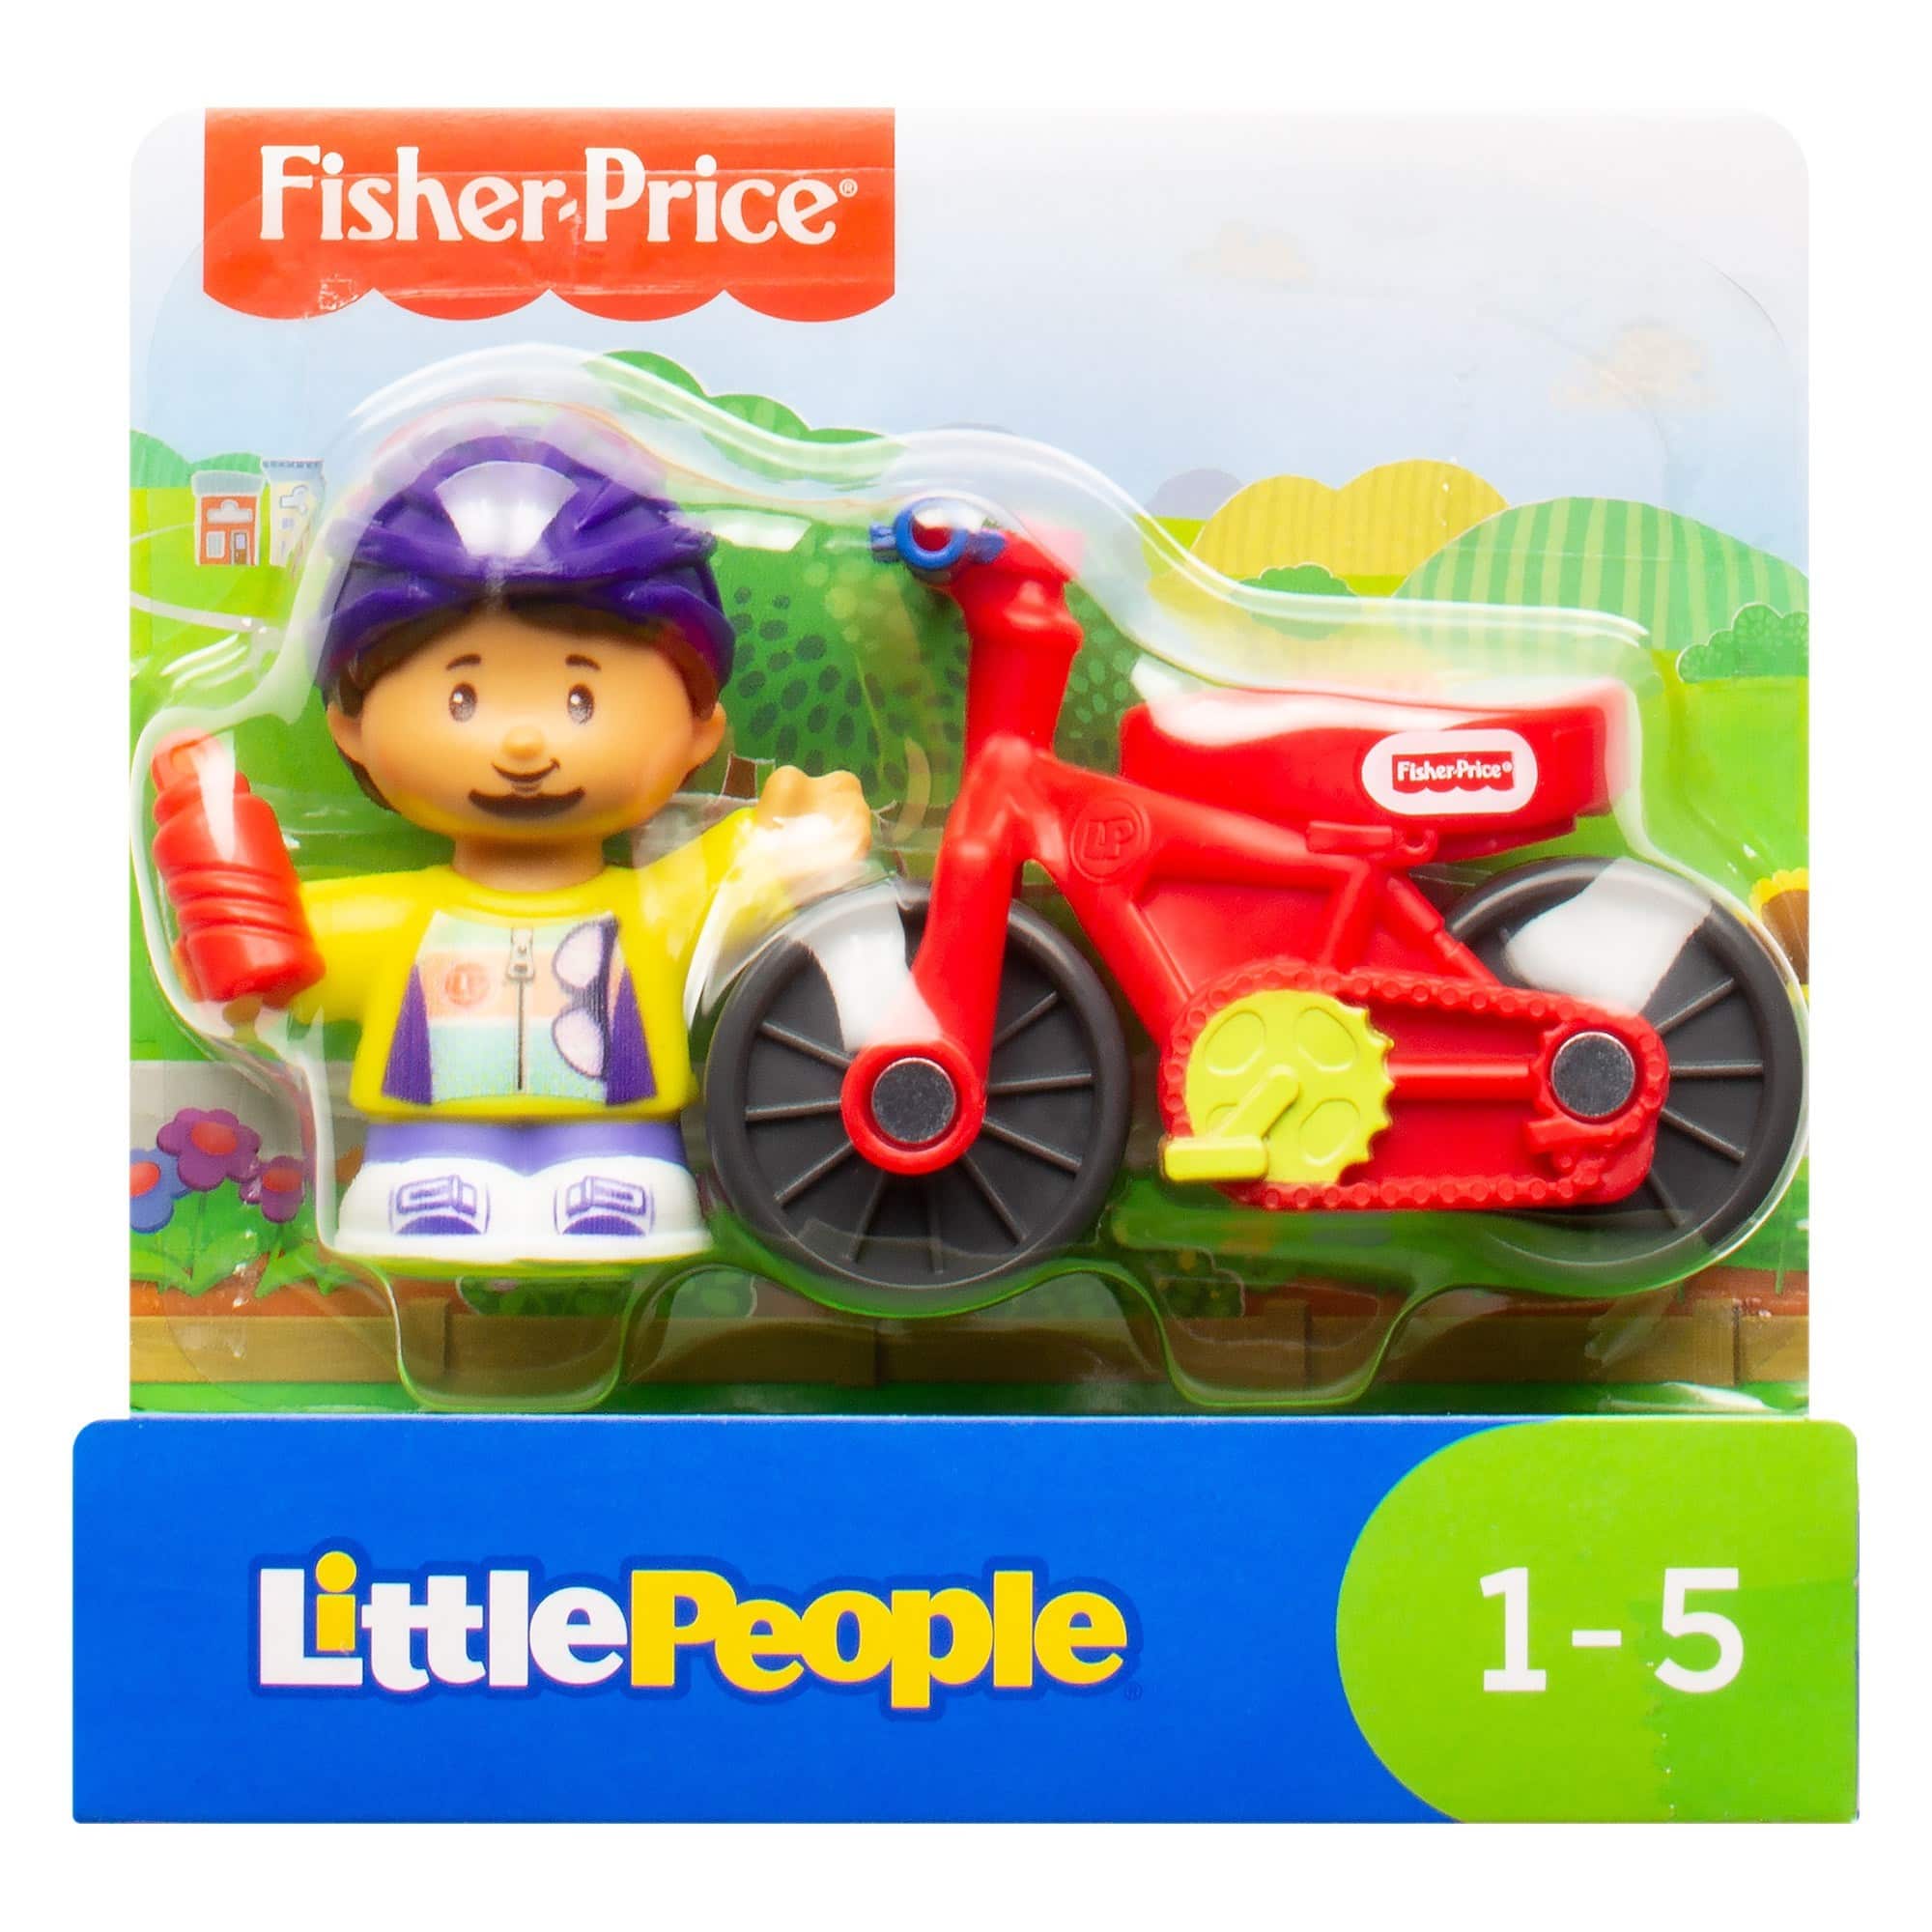 Fisher Price - Little People Figures - Cyclist Samuel and Bike